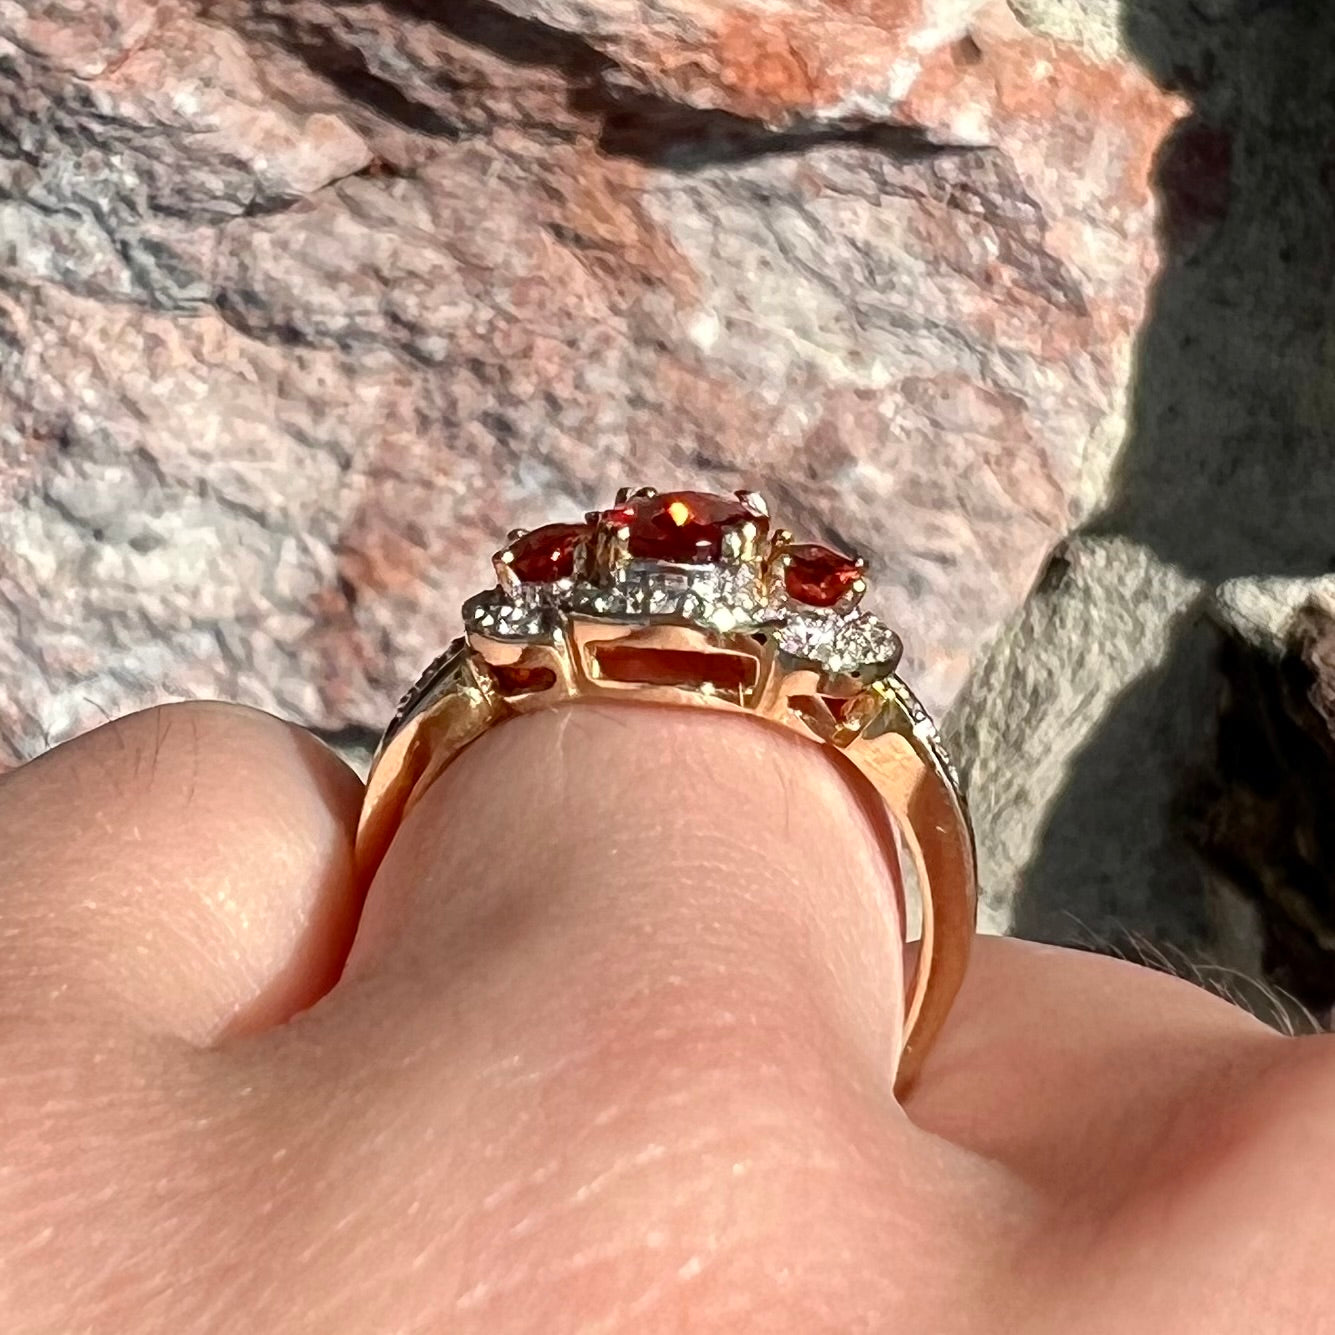 Past, present, future style red andesine feldspar and diamond halo ring cast in 14kt yellow gold.